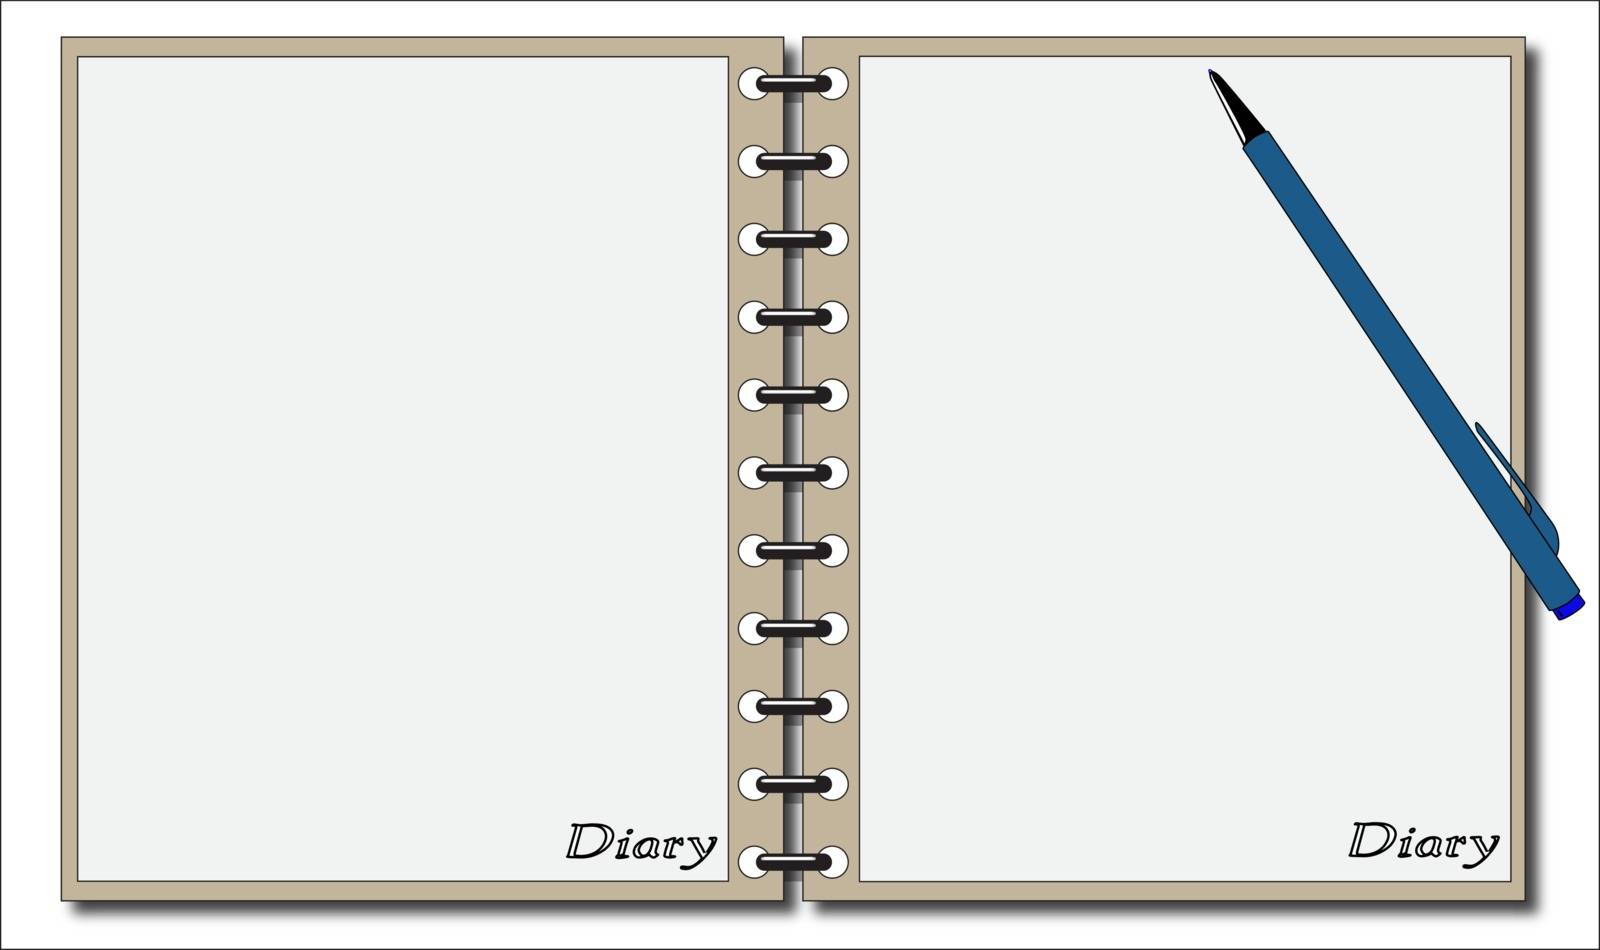 A diary with pen template or background isolated on a white background